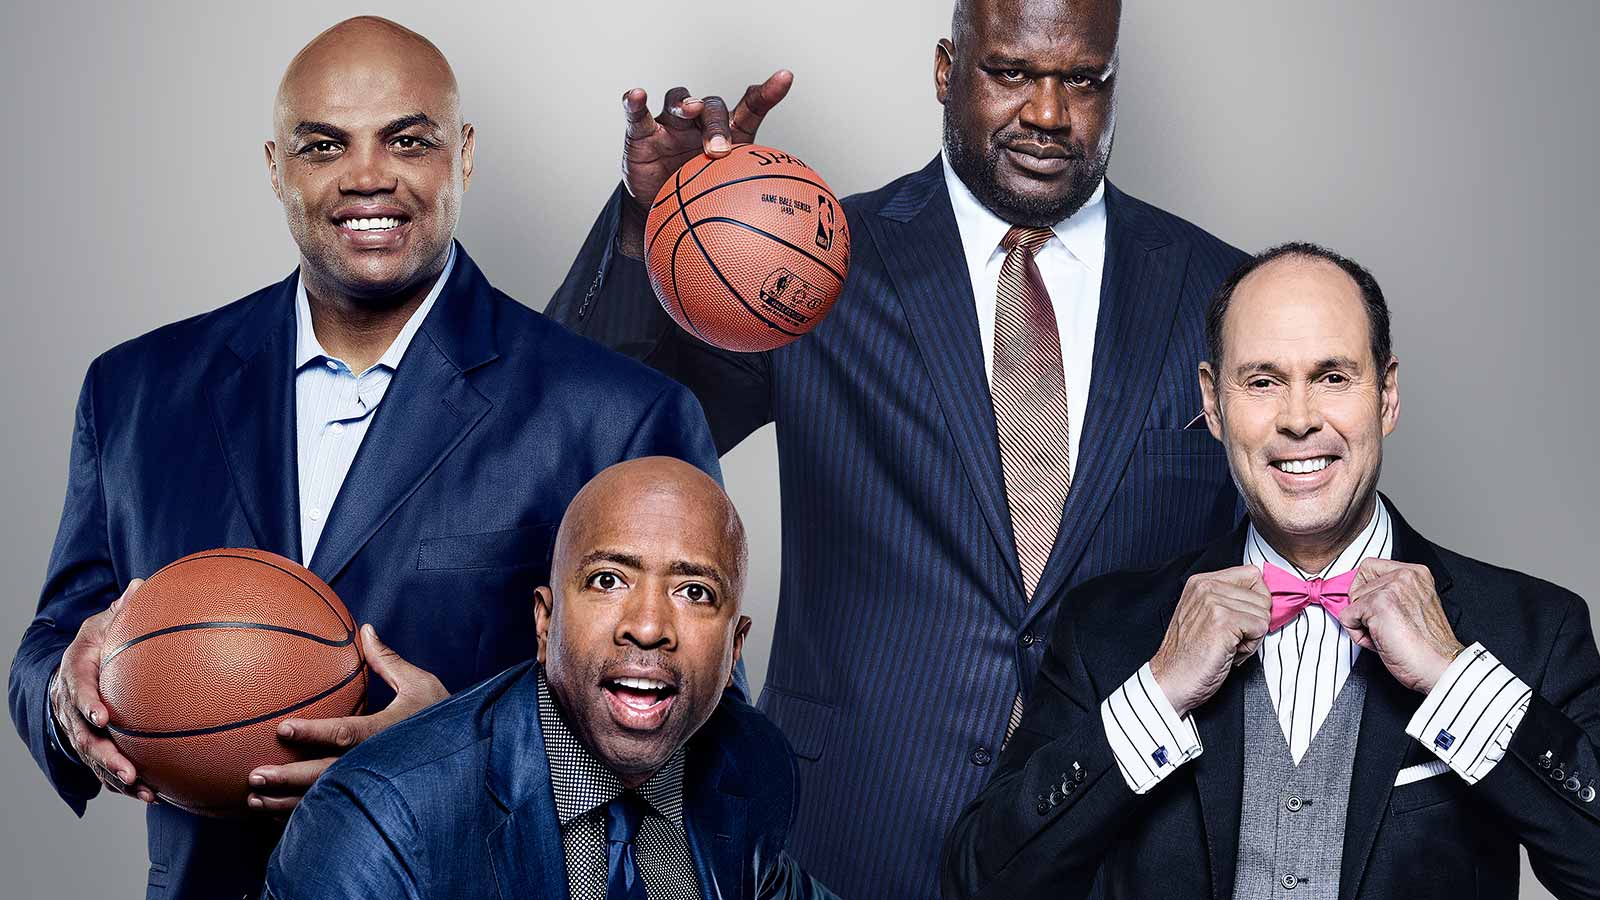 2k should partner with TNT to use the NBA on TNT crew, the